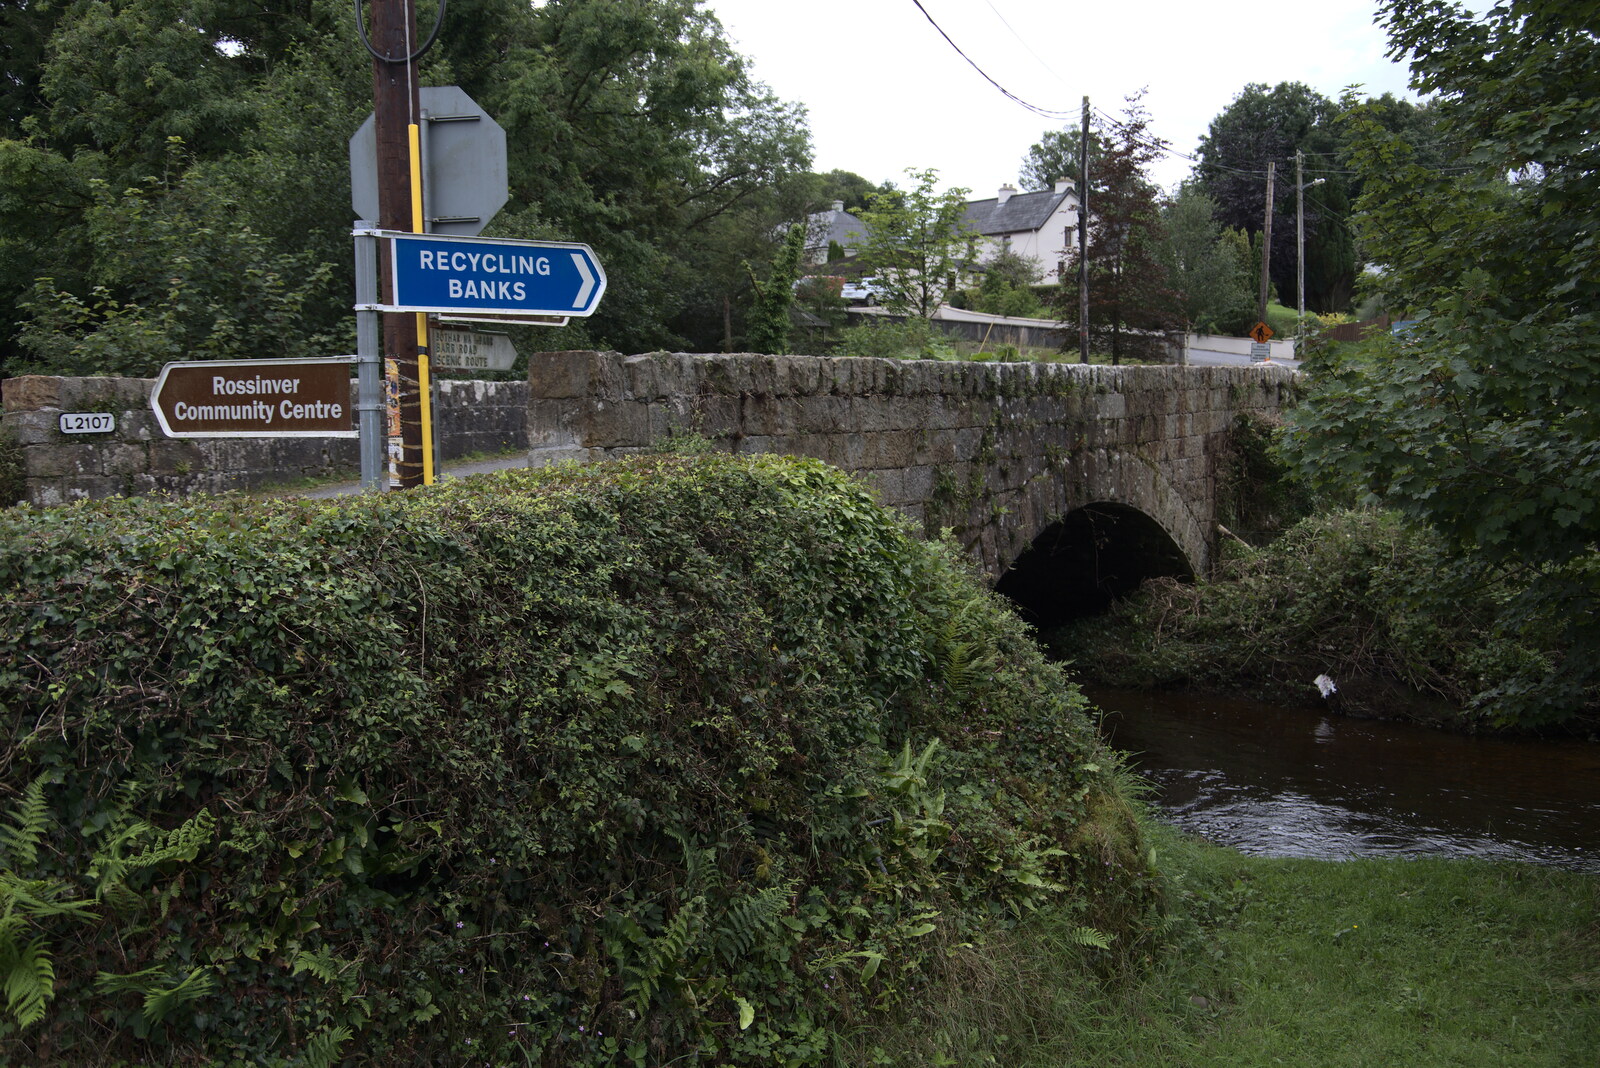 A Trip to Manorhamilton, County Leitrim, Ireland - 11th August 2021: The bridge at Rossinver